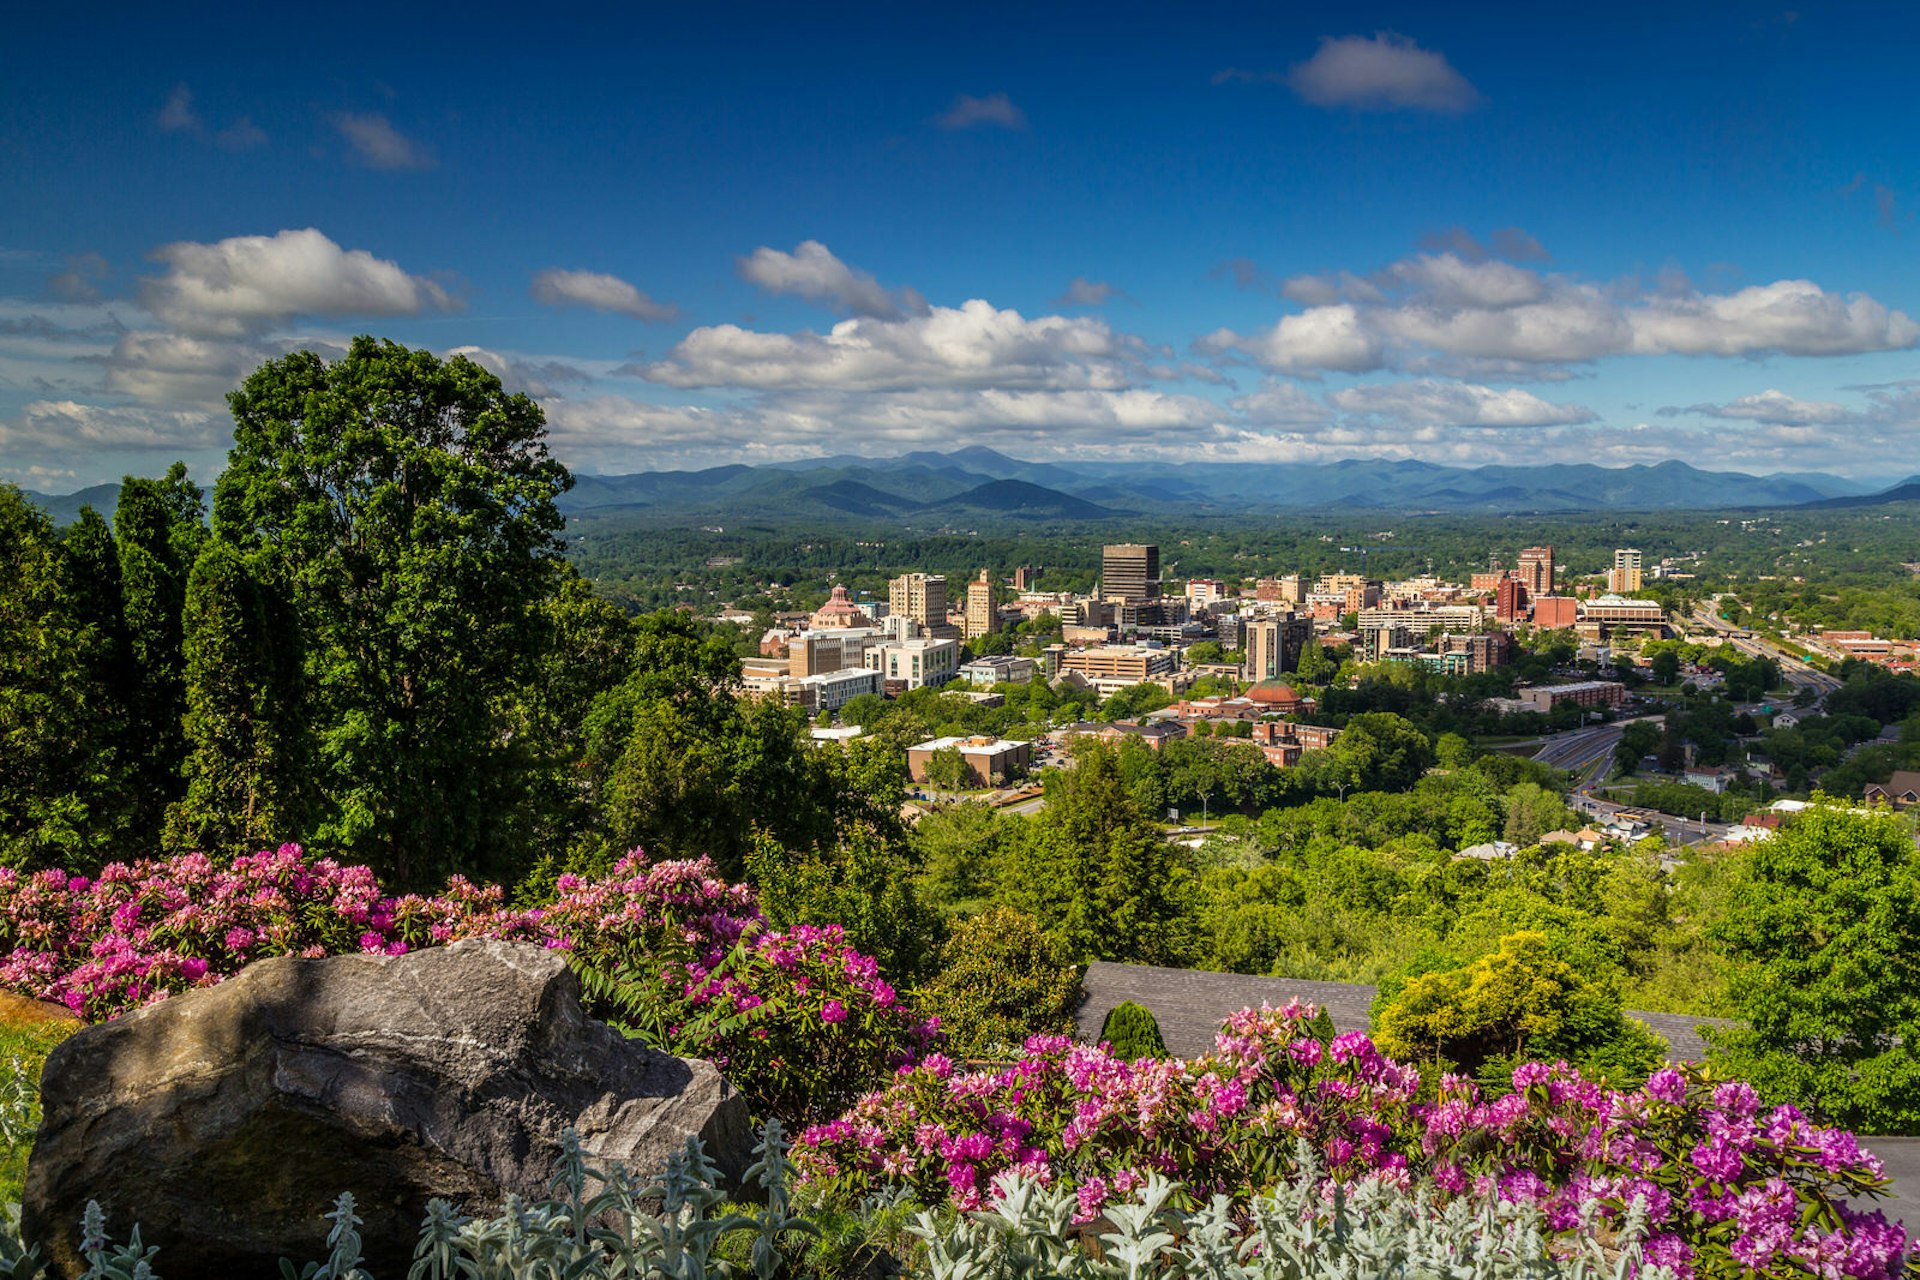 Asheville may be small, but it certainly packs a punch © Jared Kay / ExploreAsheville.com